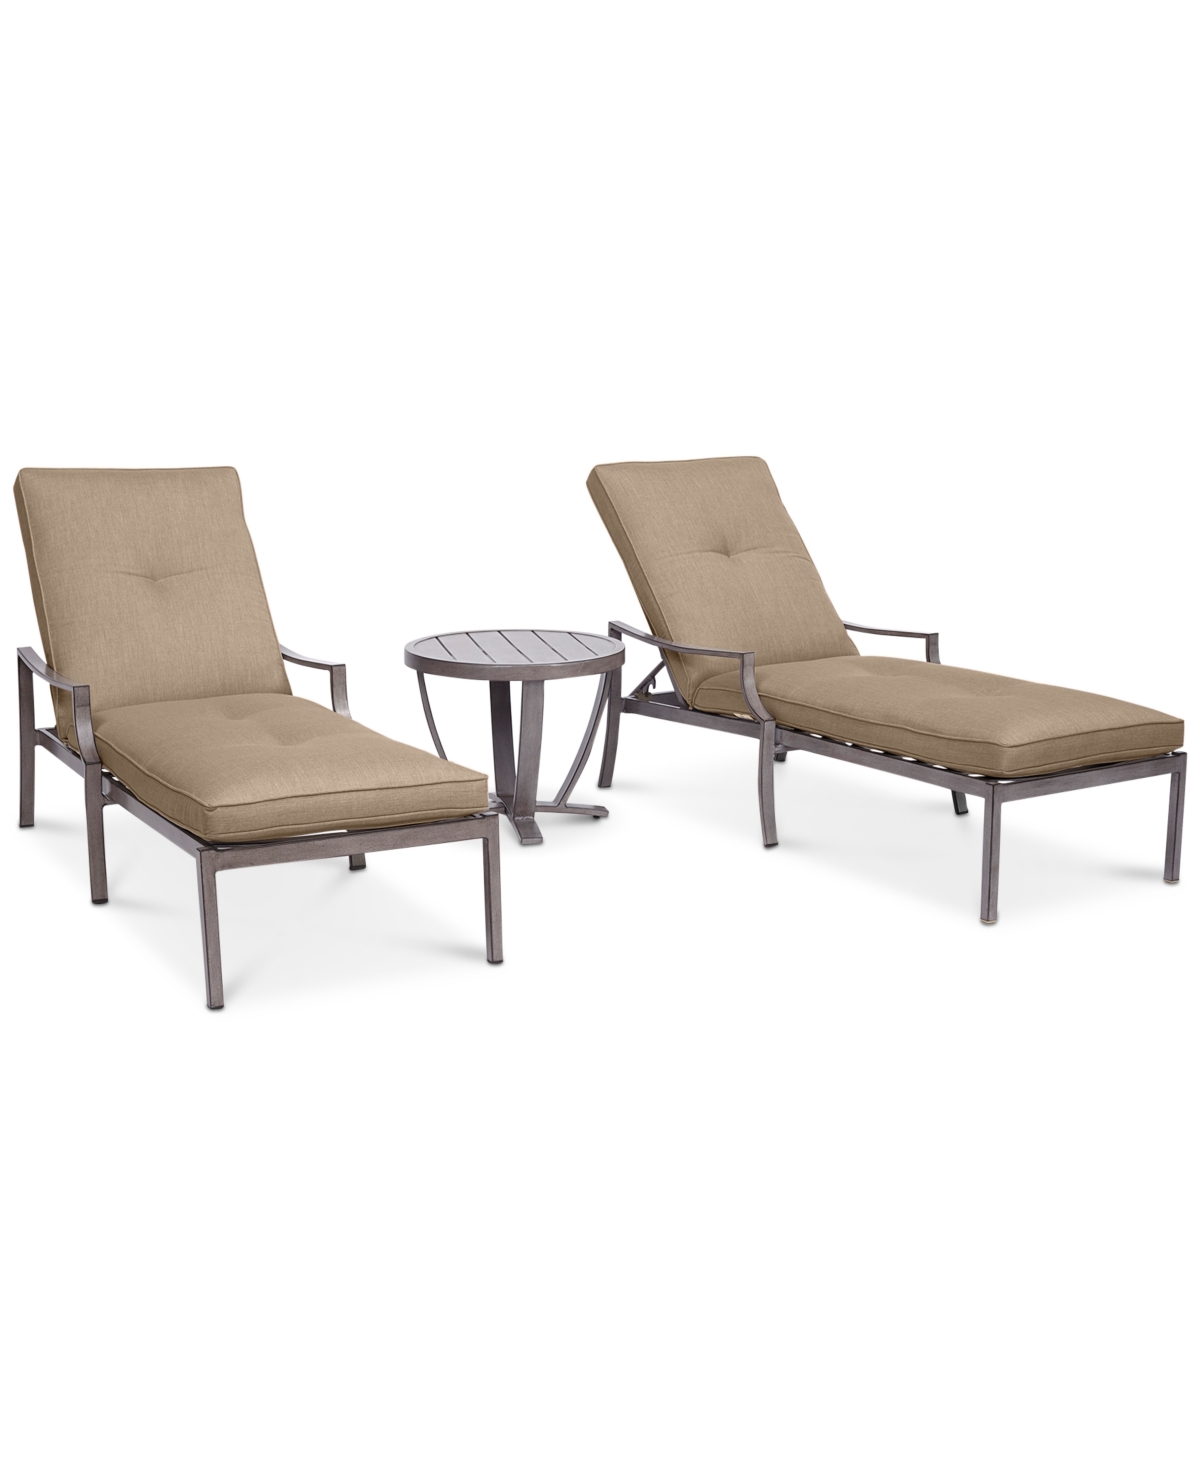 Agio Wayland Outdoor Aluminum 3-pc. Chaise Set (2 Chaise Lounges & 1 End Table), Created For Macy's In Outdura Remy Pebble